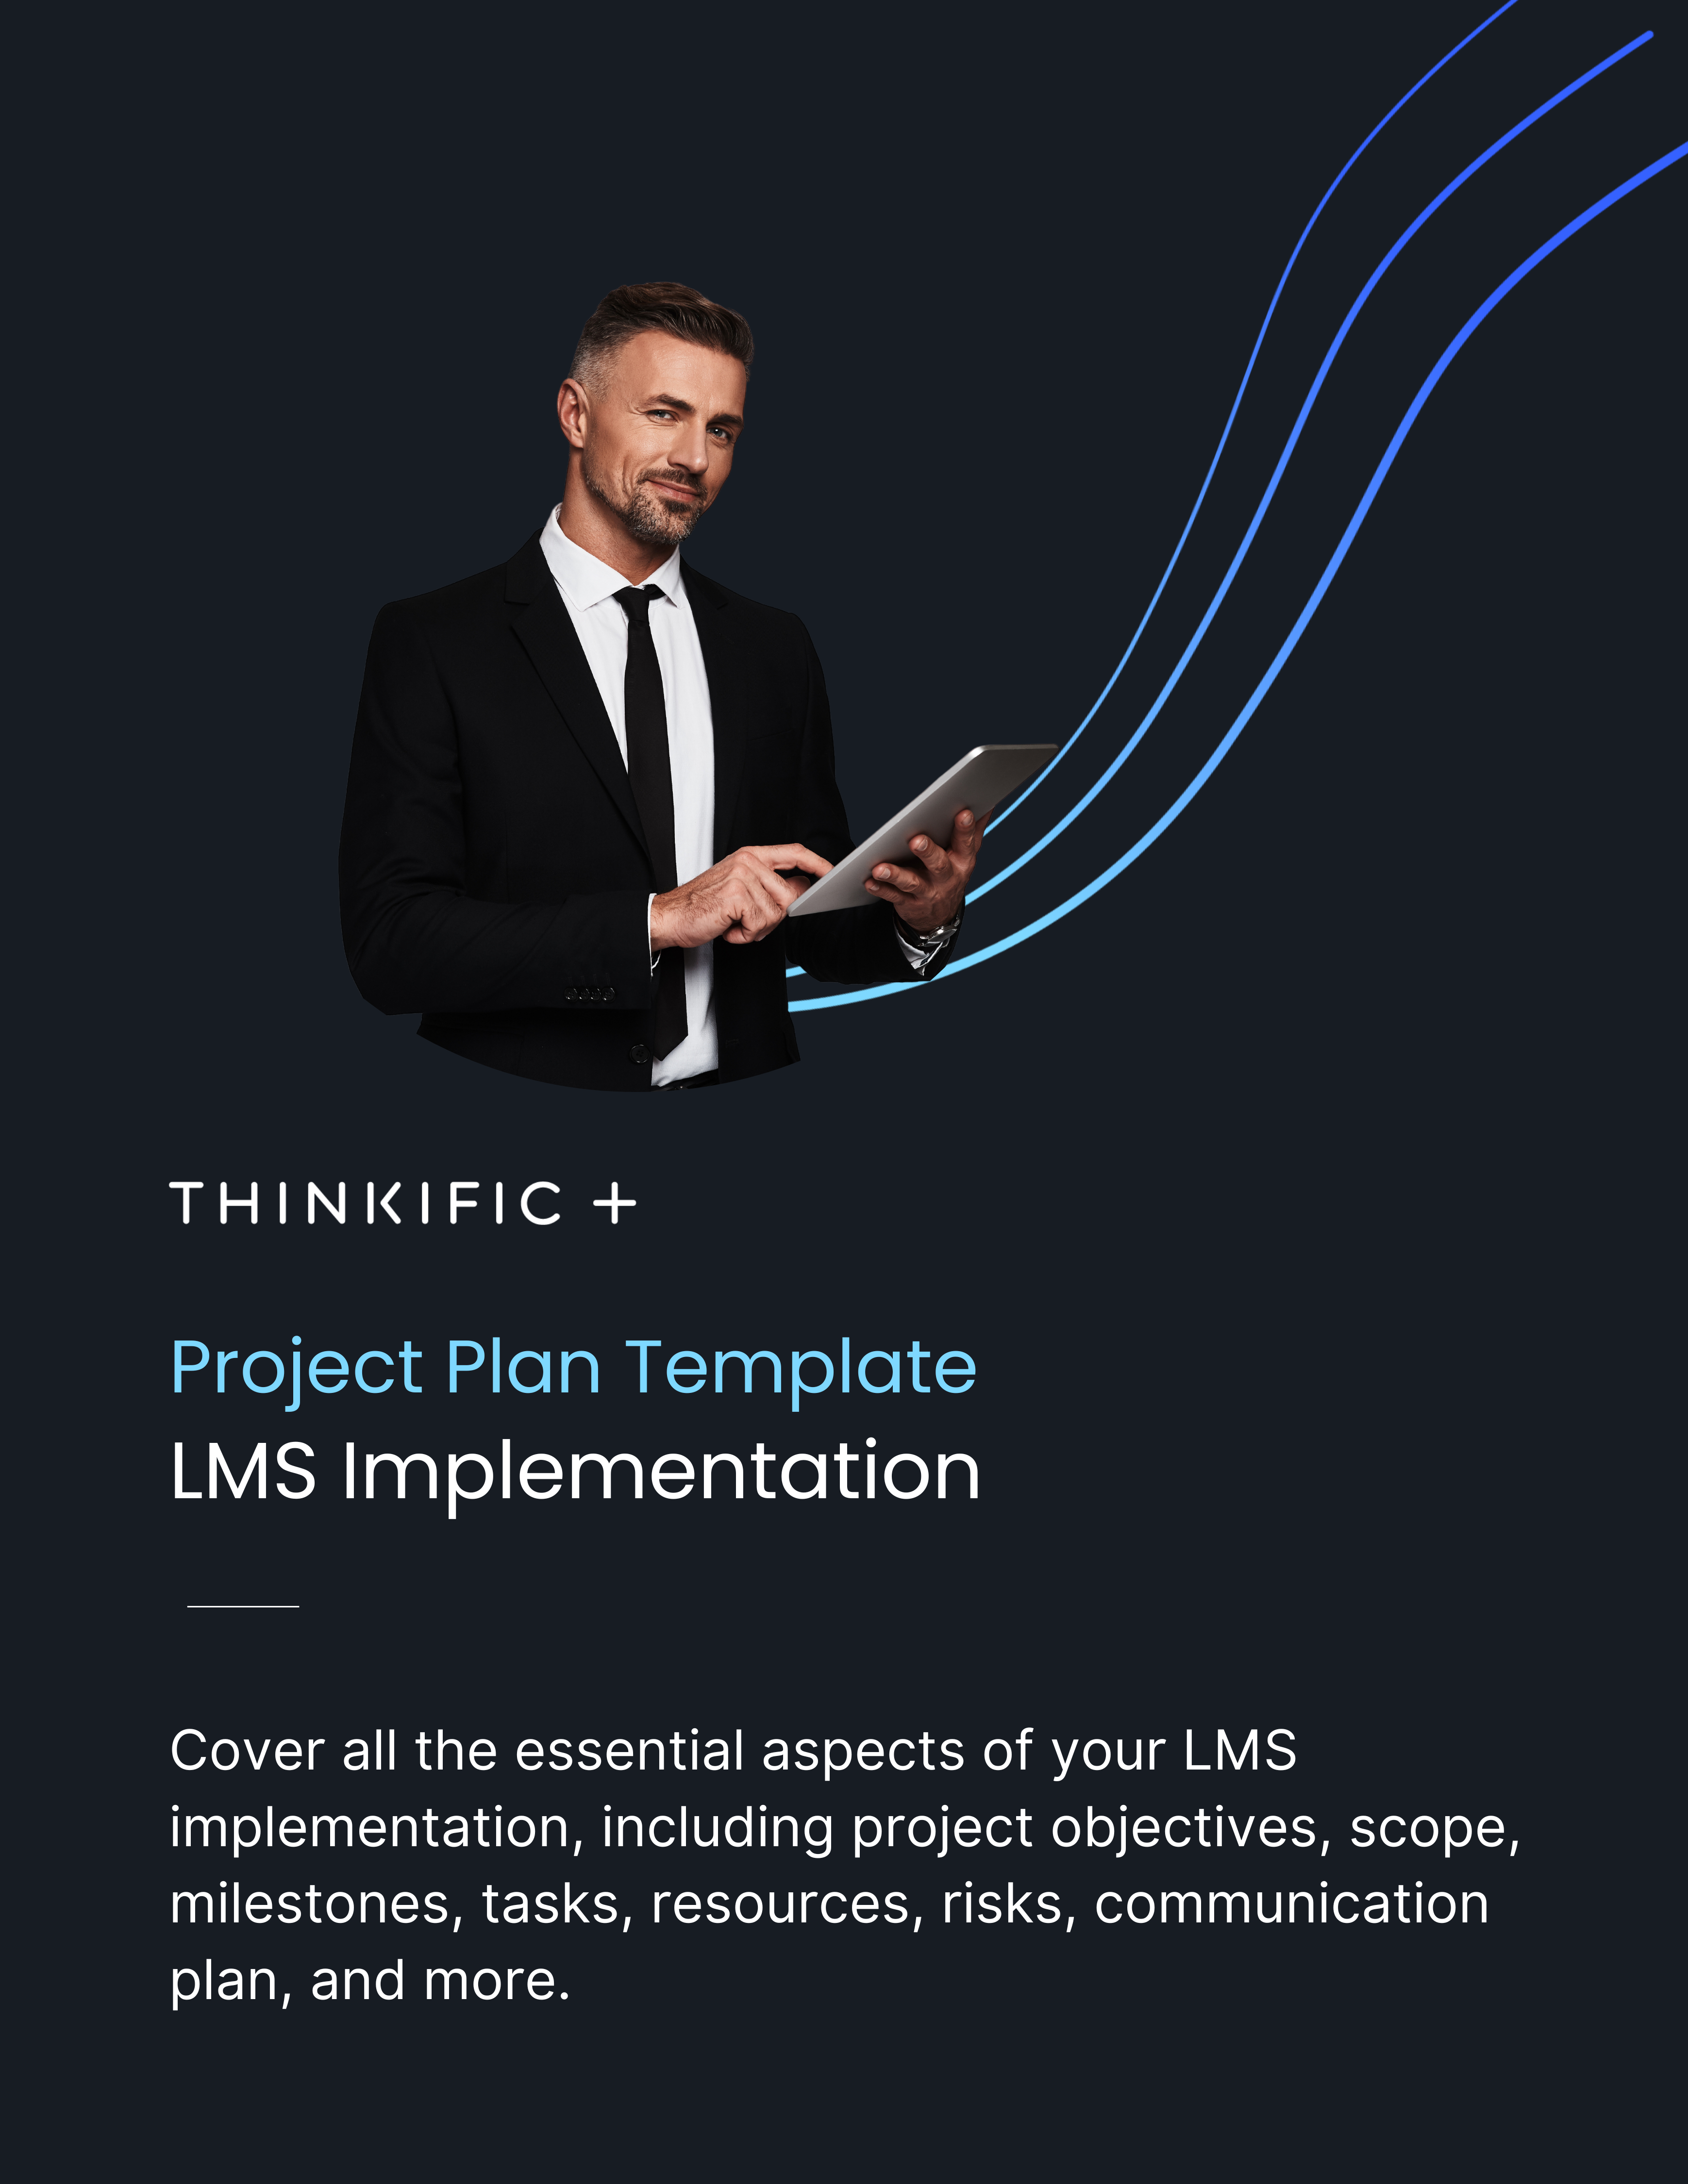 Free Guide to LMS Implementation 